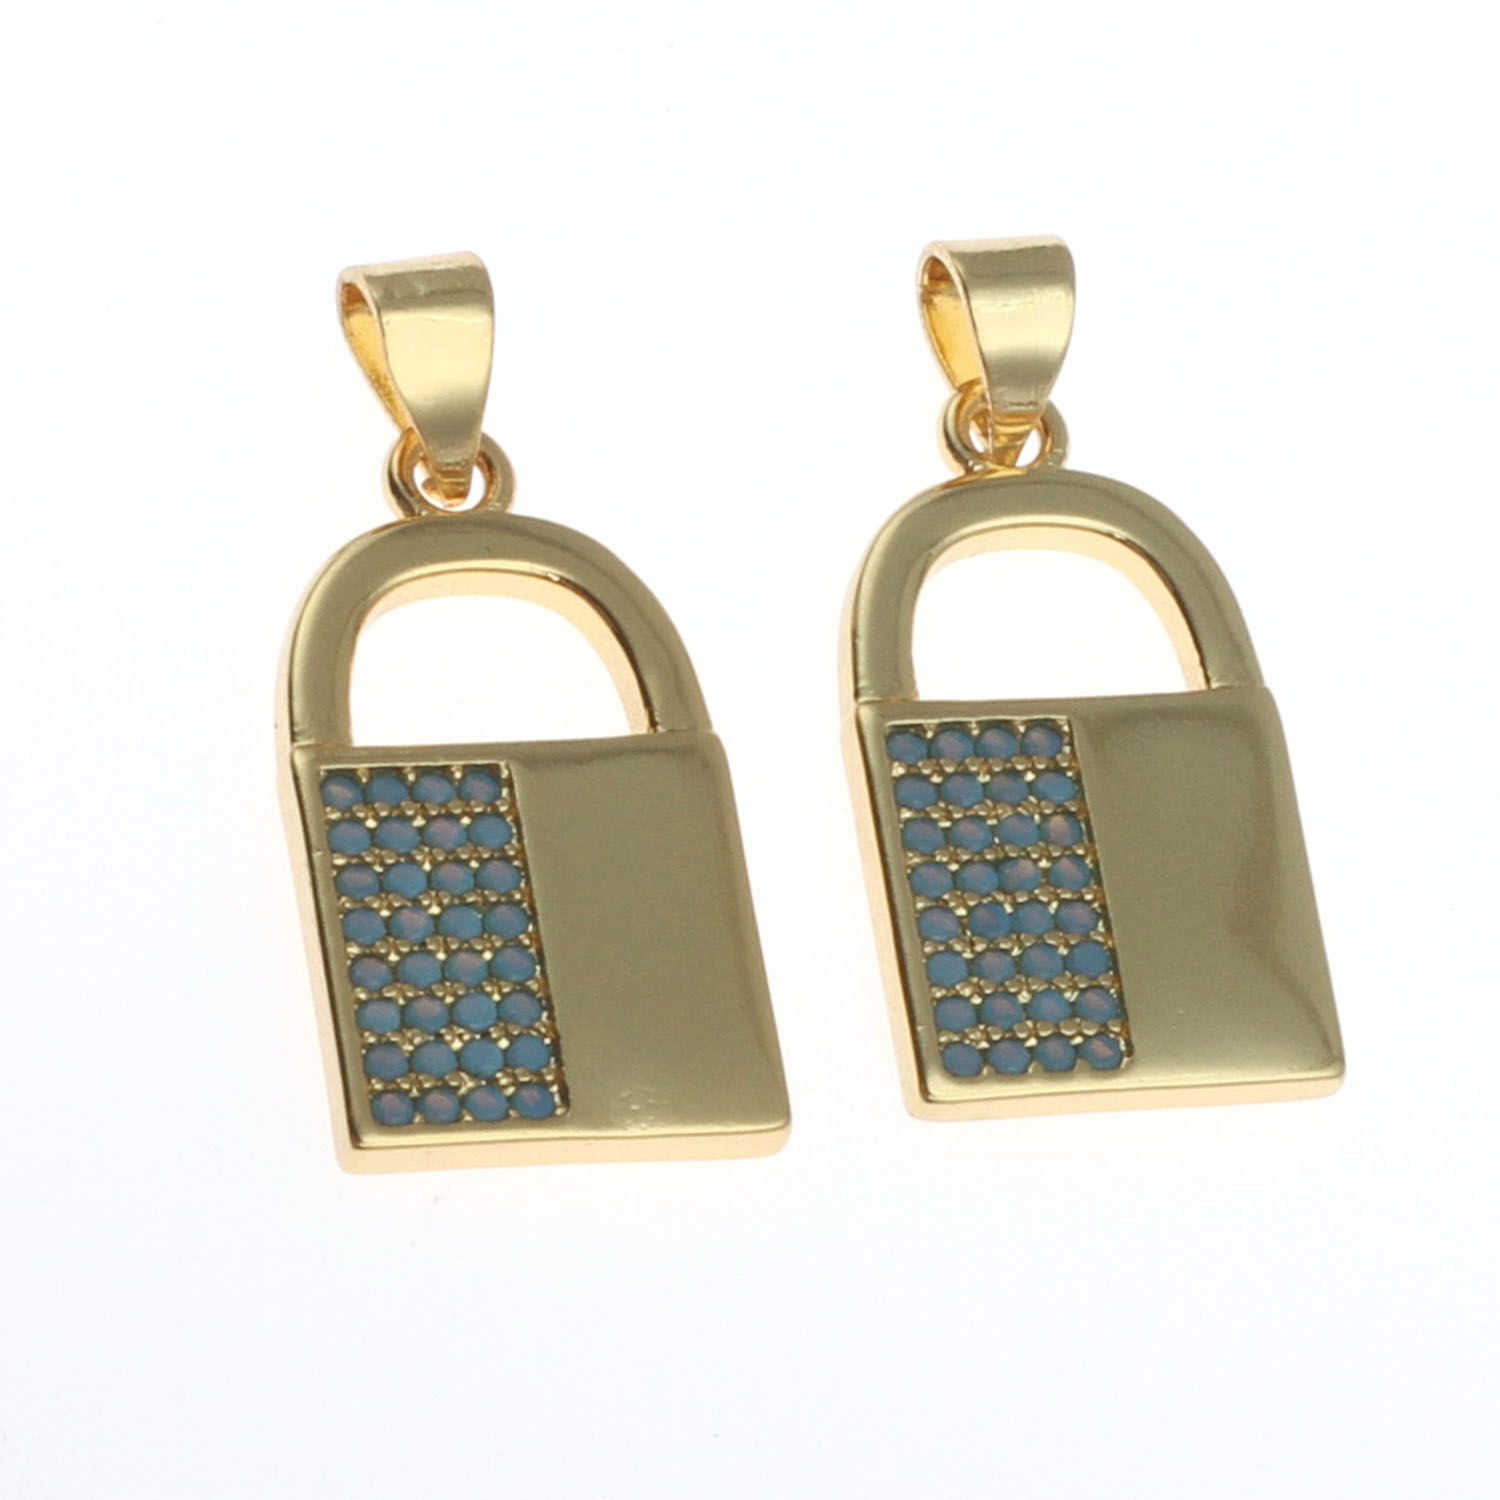 4:Gold and blue diamonds